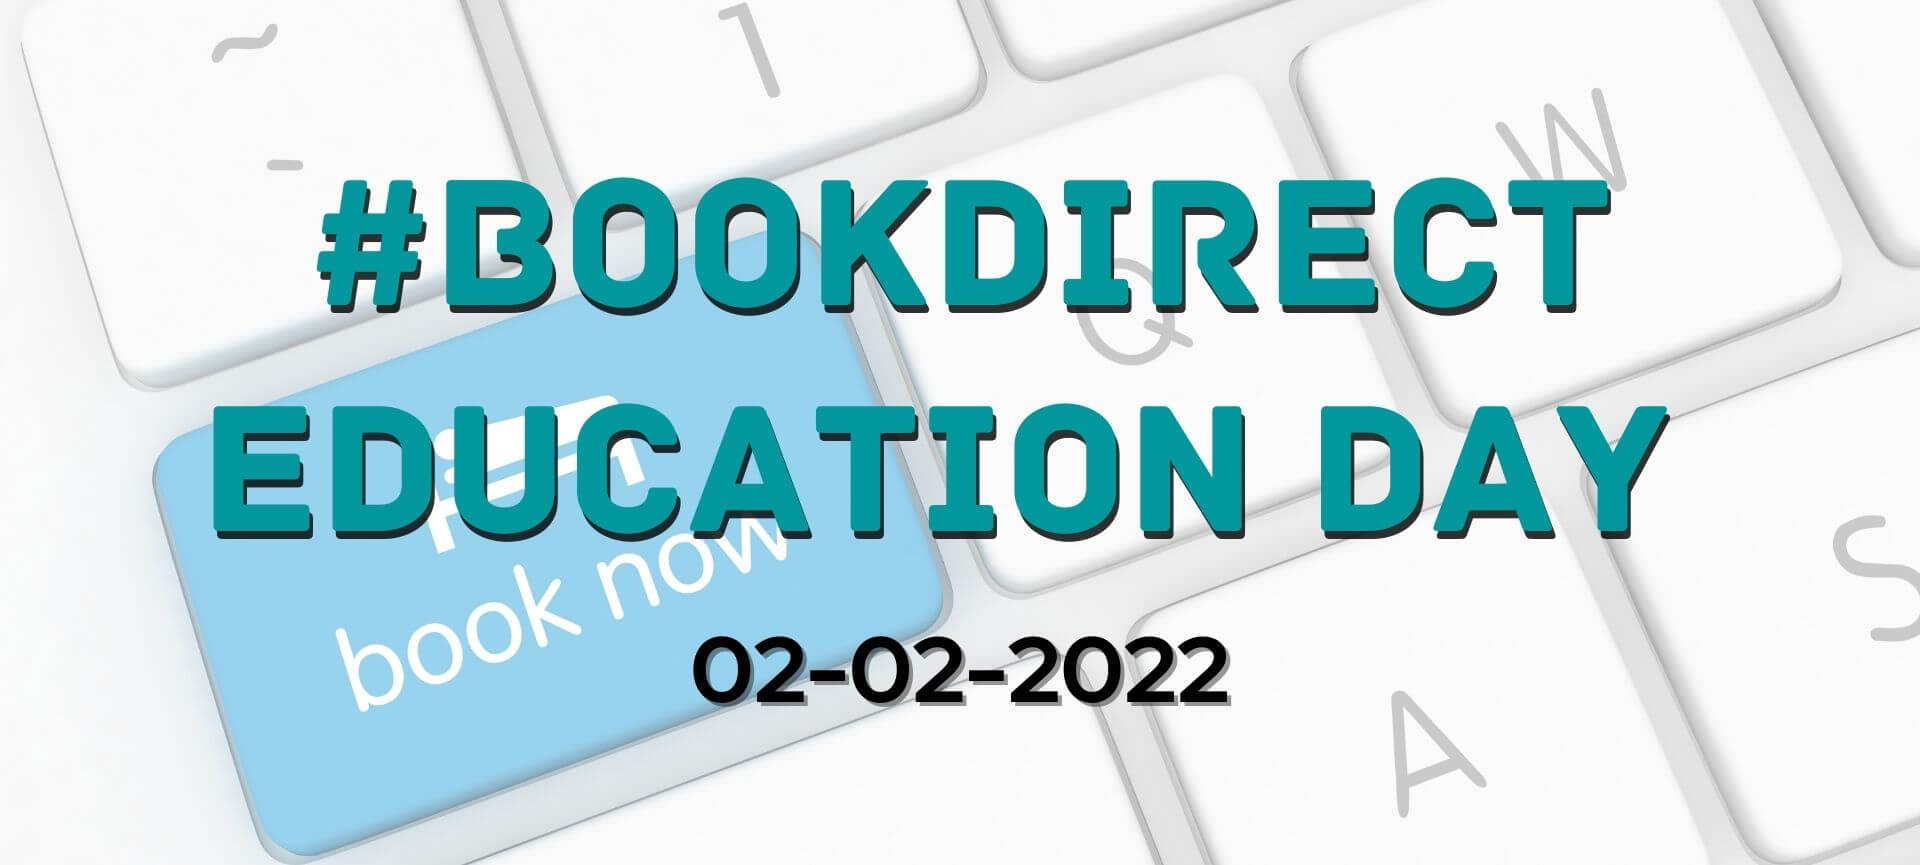 #BOOKDIRECT Guest Education Day